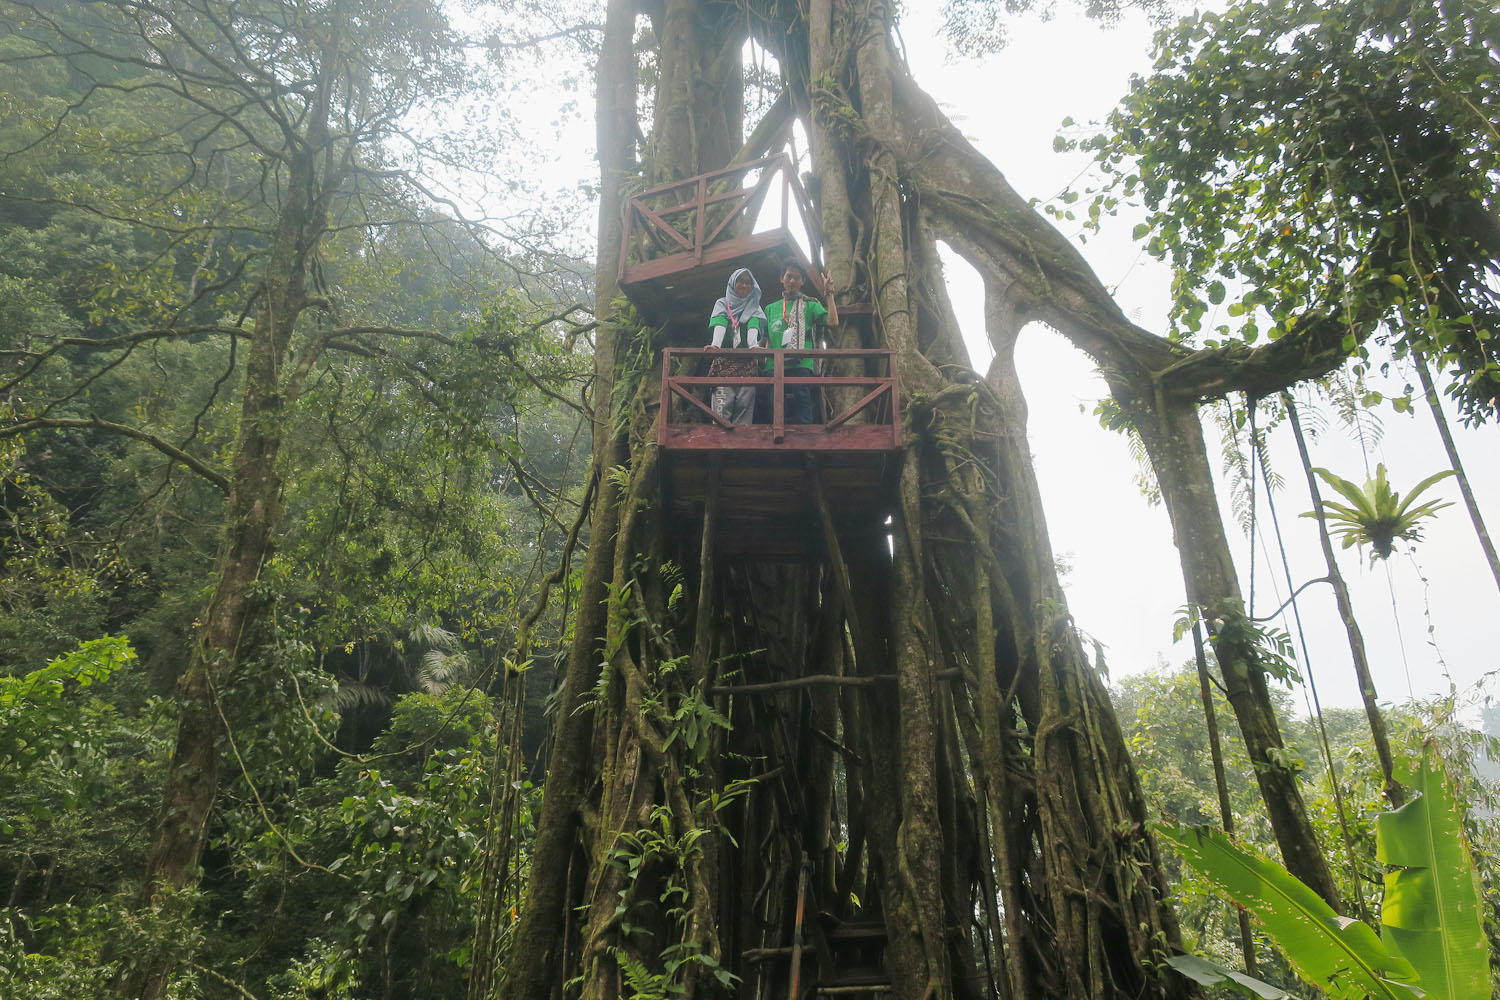 Two people looking at the forest canopy from an elevated platform in a tree.